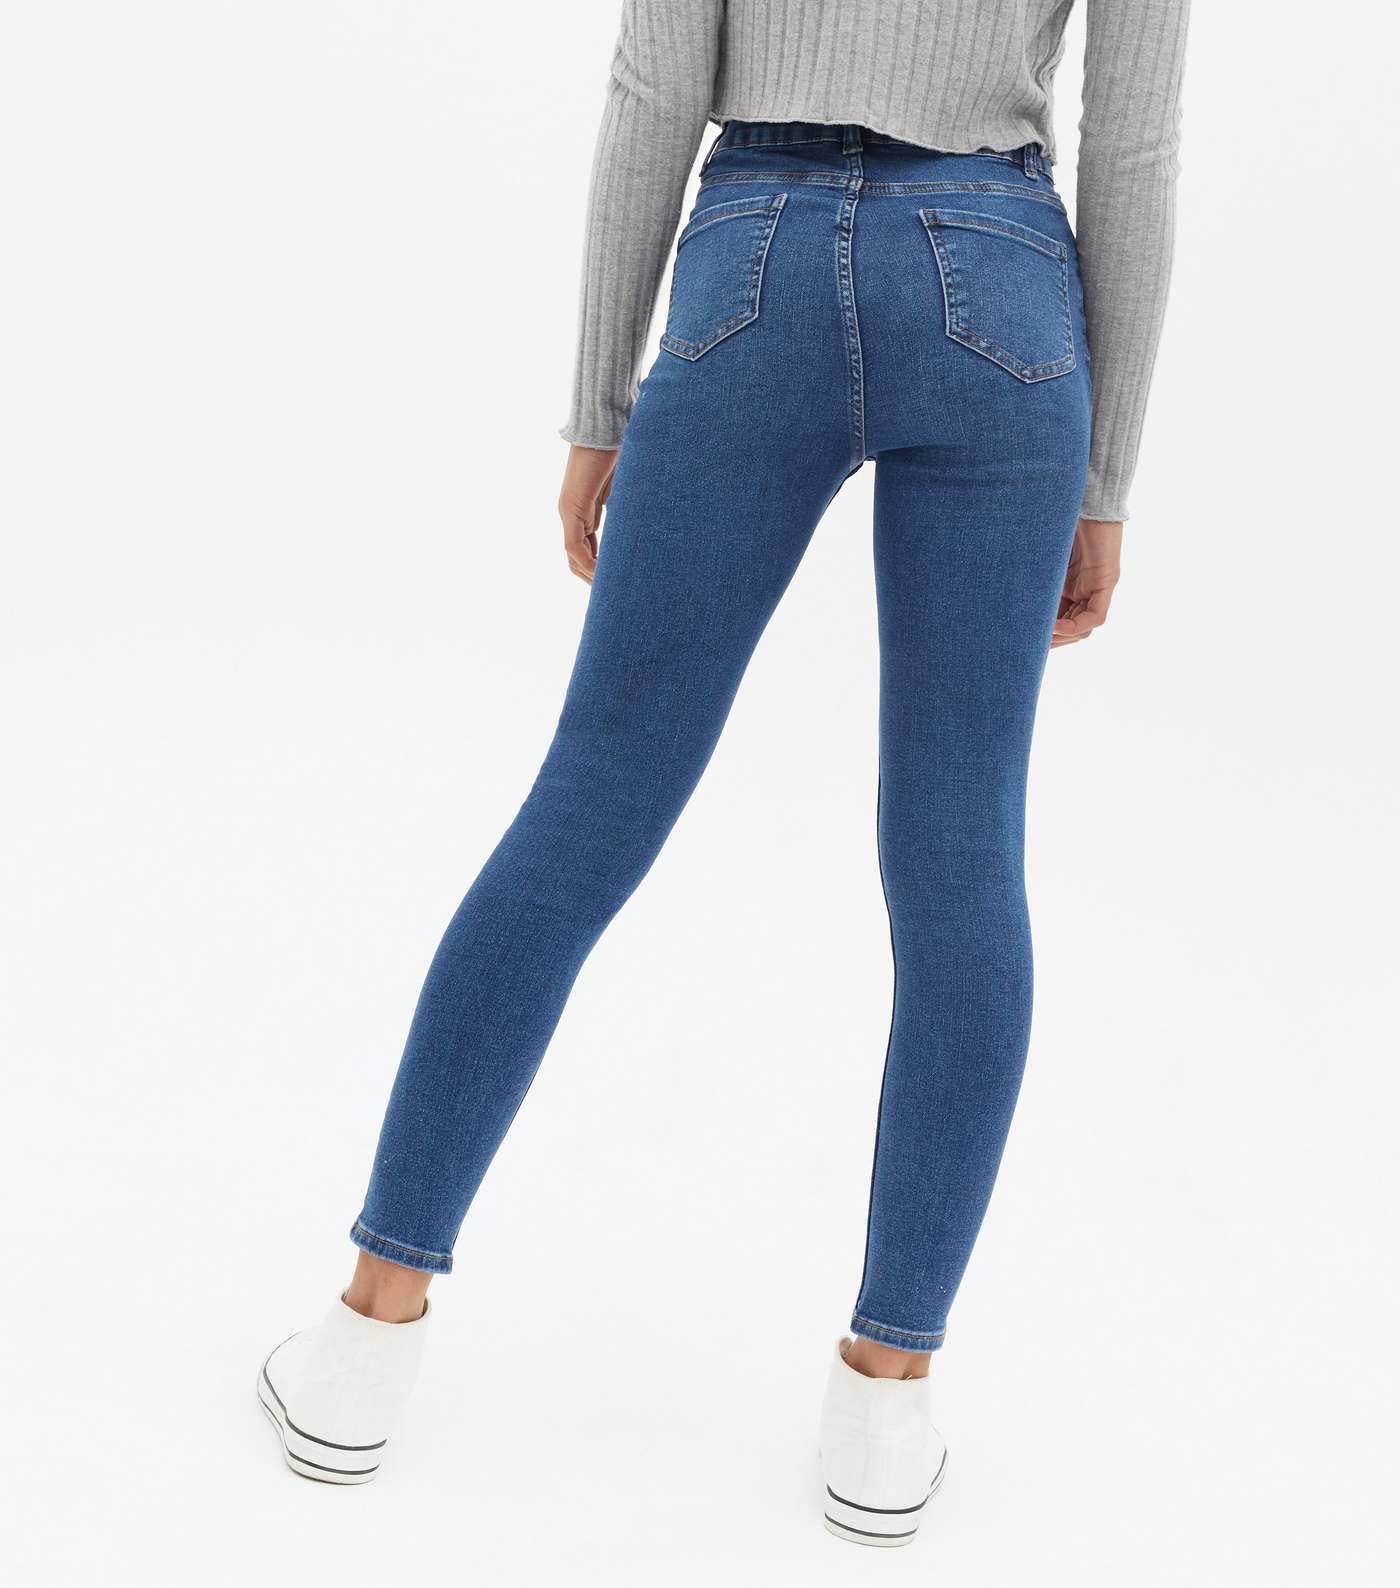 Girls Blue Ripped Knee High Rise Ashleigh Skinny Jeans Image 4